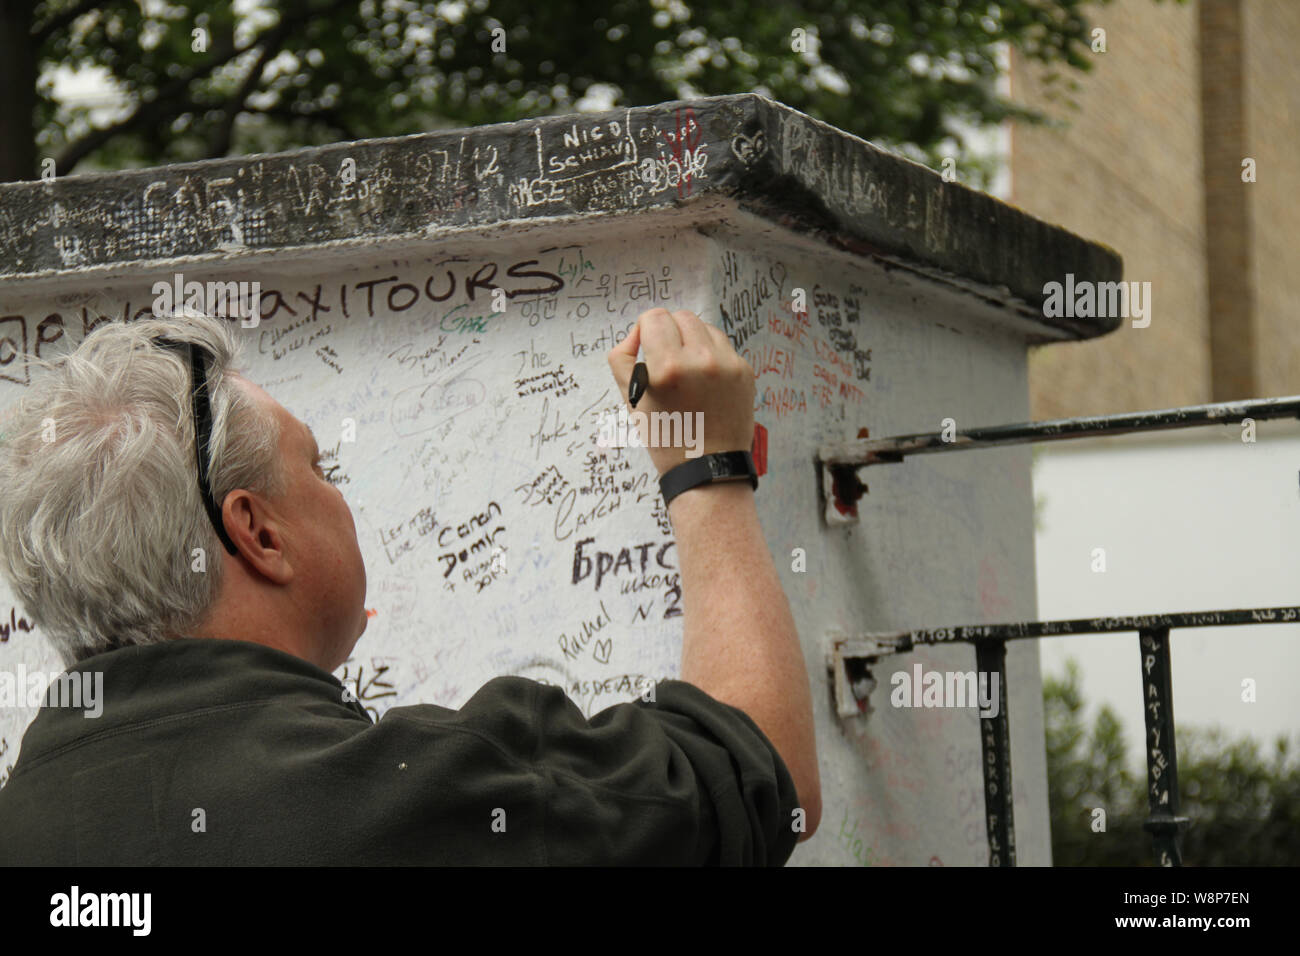 London, UK - 10 August 2019: A Beatles fan writes on the  Abbey Road Studio wall  on the weekend after the 50th anniversey of the Beatles penultimate album cover. On August 8, 1969 the four Beatles walked out of No. 3 Abbey Road after finishing recording for a 15 minute photos shoot by photographer Iain Macmillan. Credit: David Mbiyu Stock Photo